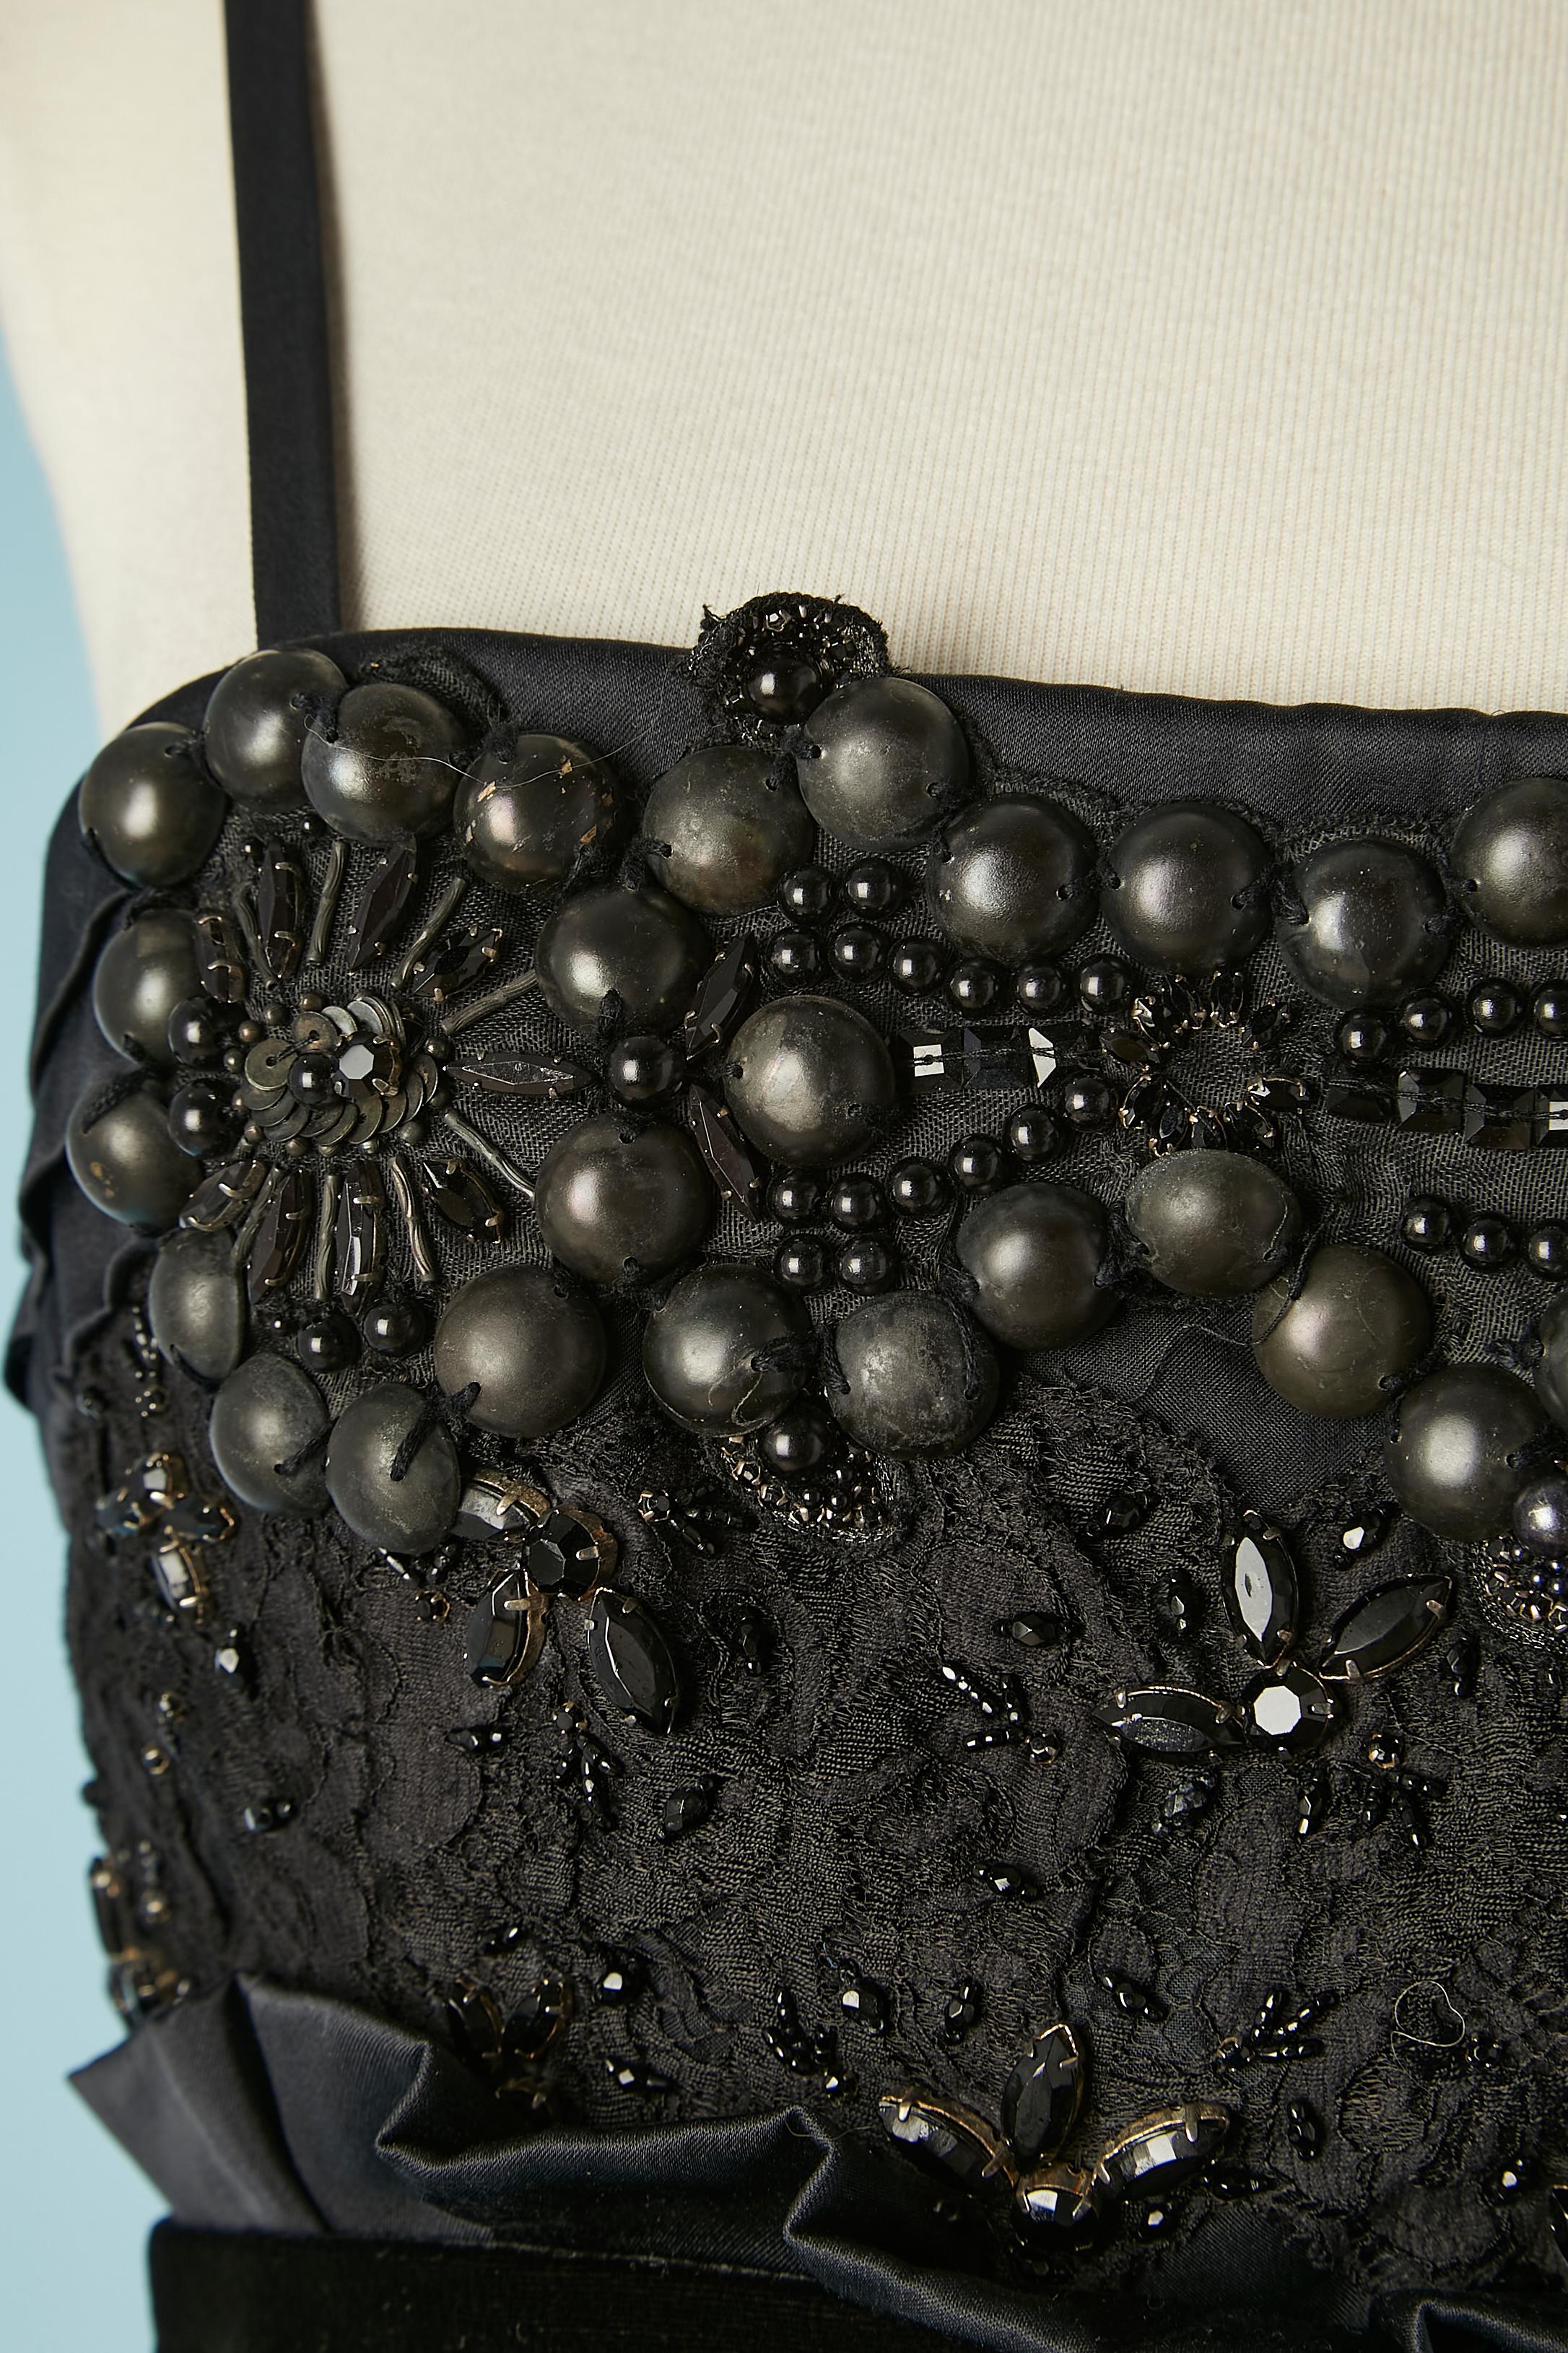 Black cocktail dress with lace, beads and velvet belt. Fabric composition: silk, rayon, cotton, nylon , lace, glass beads and metal beads.
Silk lining. 
Zip and hook&eye middle back. Boned on the side of the bustier and silicone stripe on the top